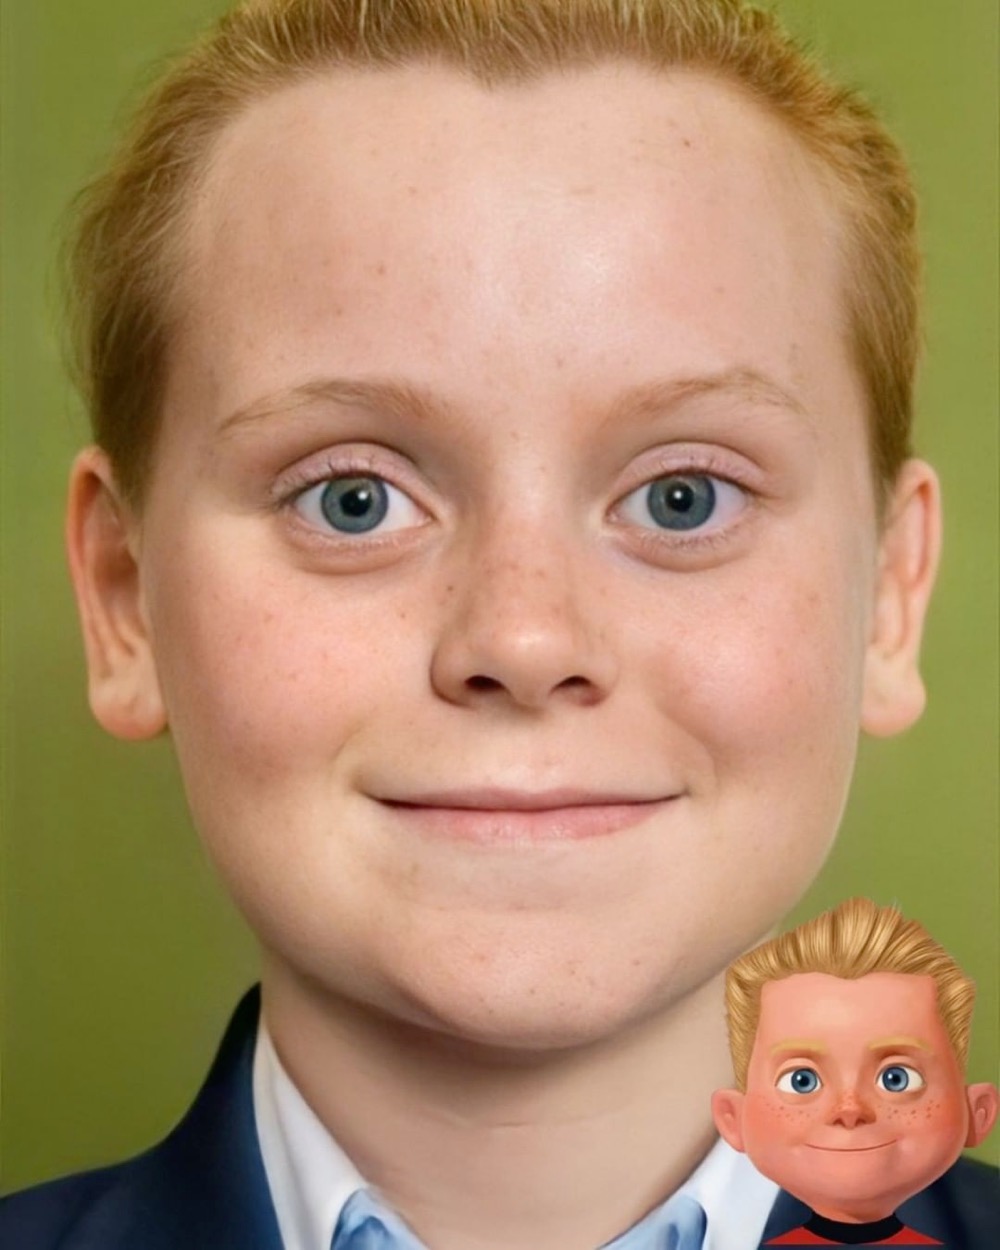 a photorealistic portrait of Dash from The Incredibles